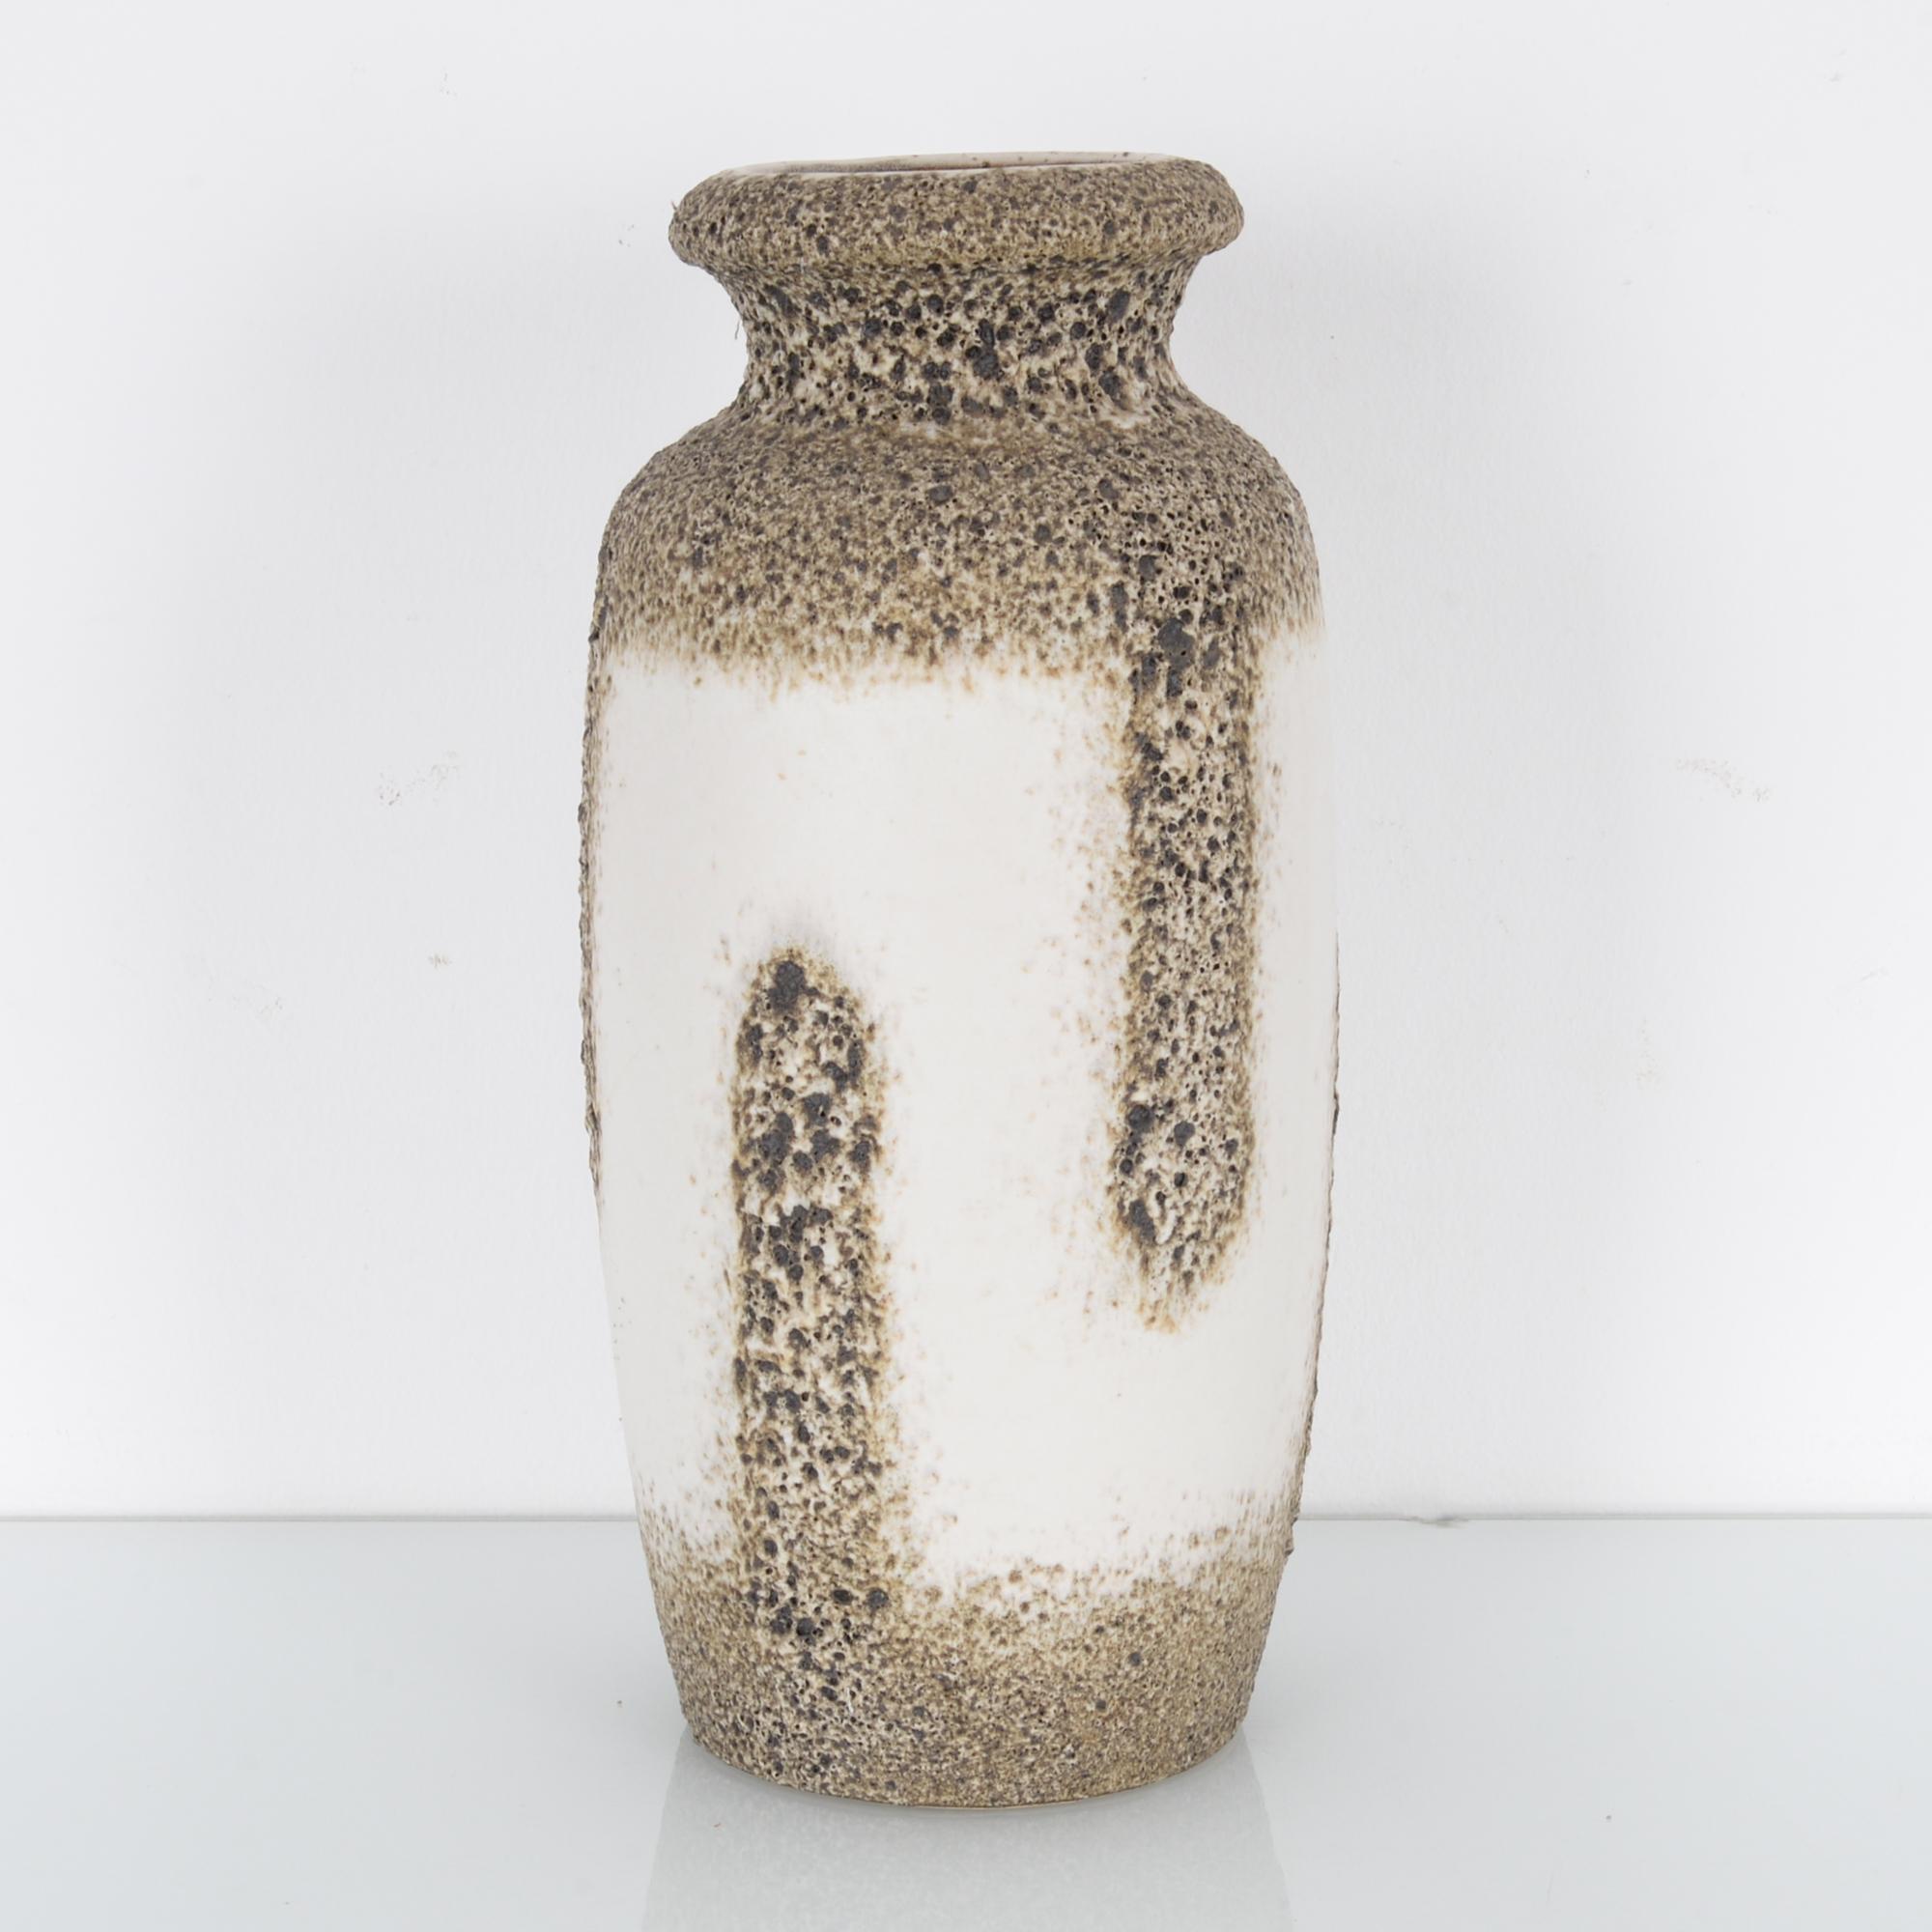 This ceramic vase was made in Germany, circa 1960. It has a textured, coral-like surface in shades of brown and gray, interrupted by ivory white swathes on the body. The rounded edges of its mouth, neck, and shoulders give the vase an elegant and